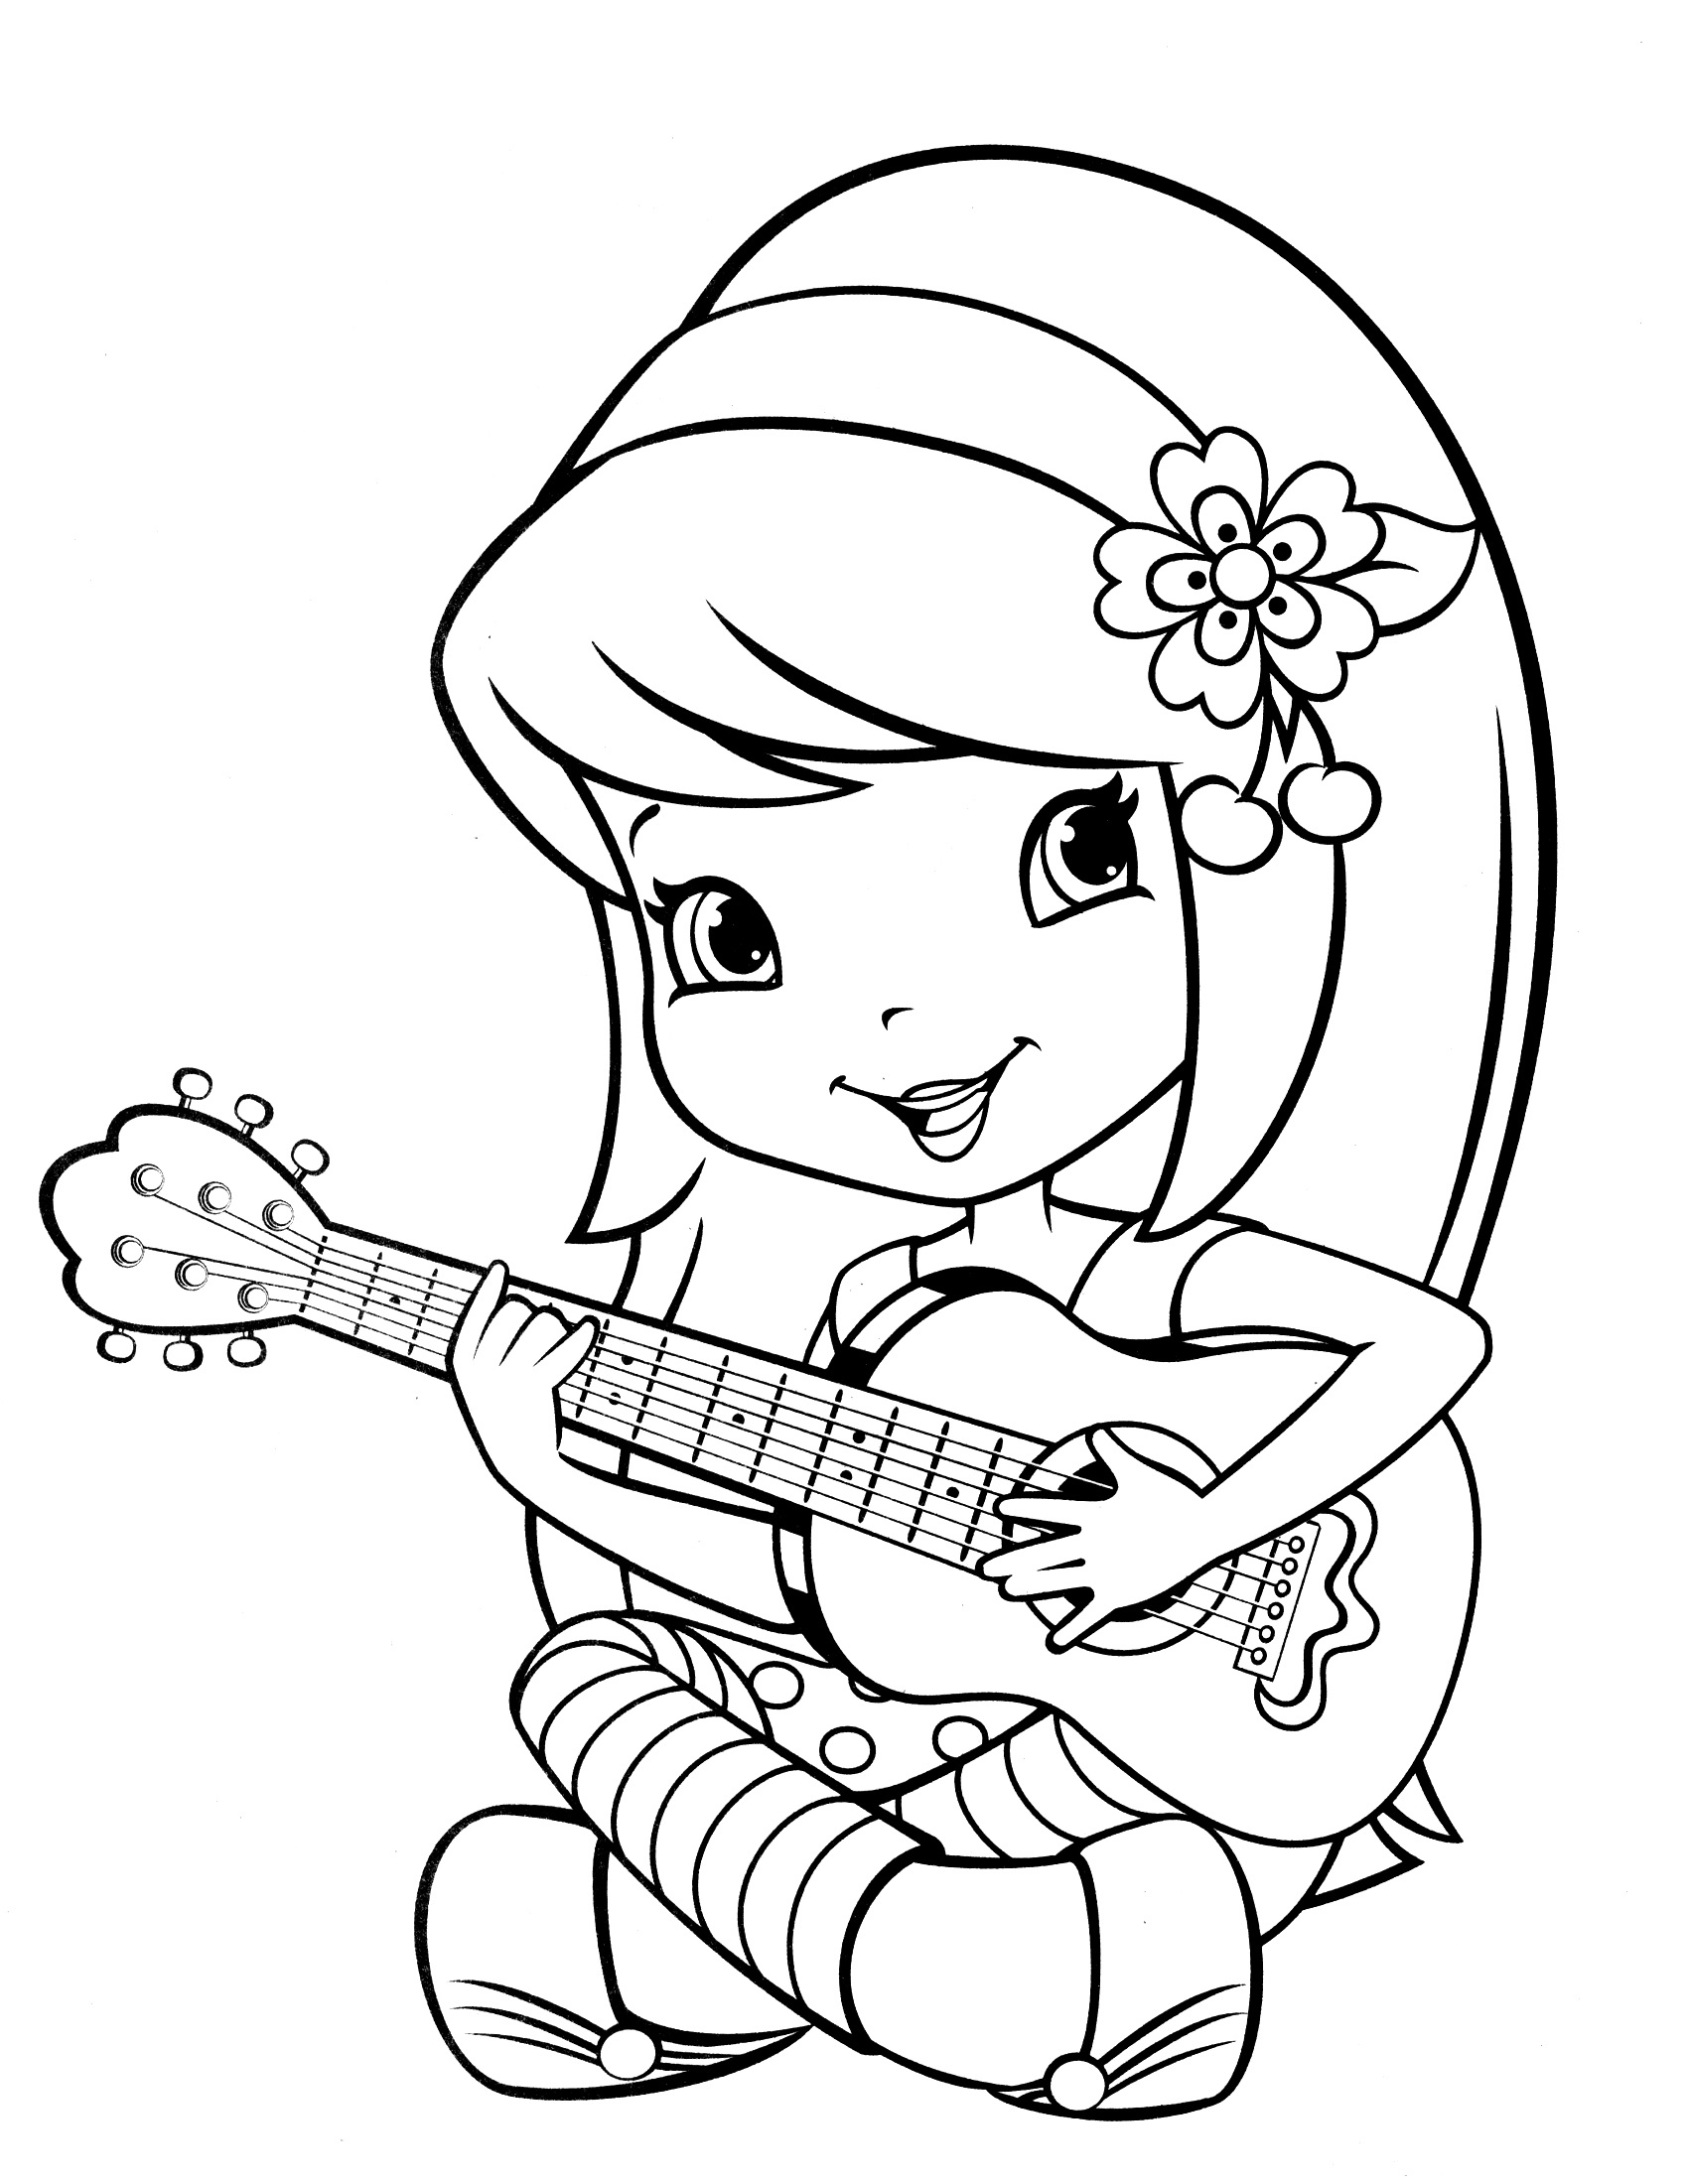 Strawberry Shortcake Coloring Pages for Preschoolers